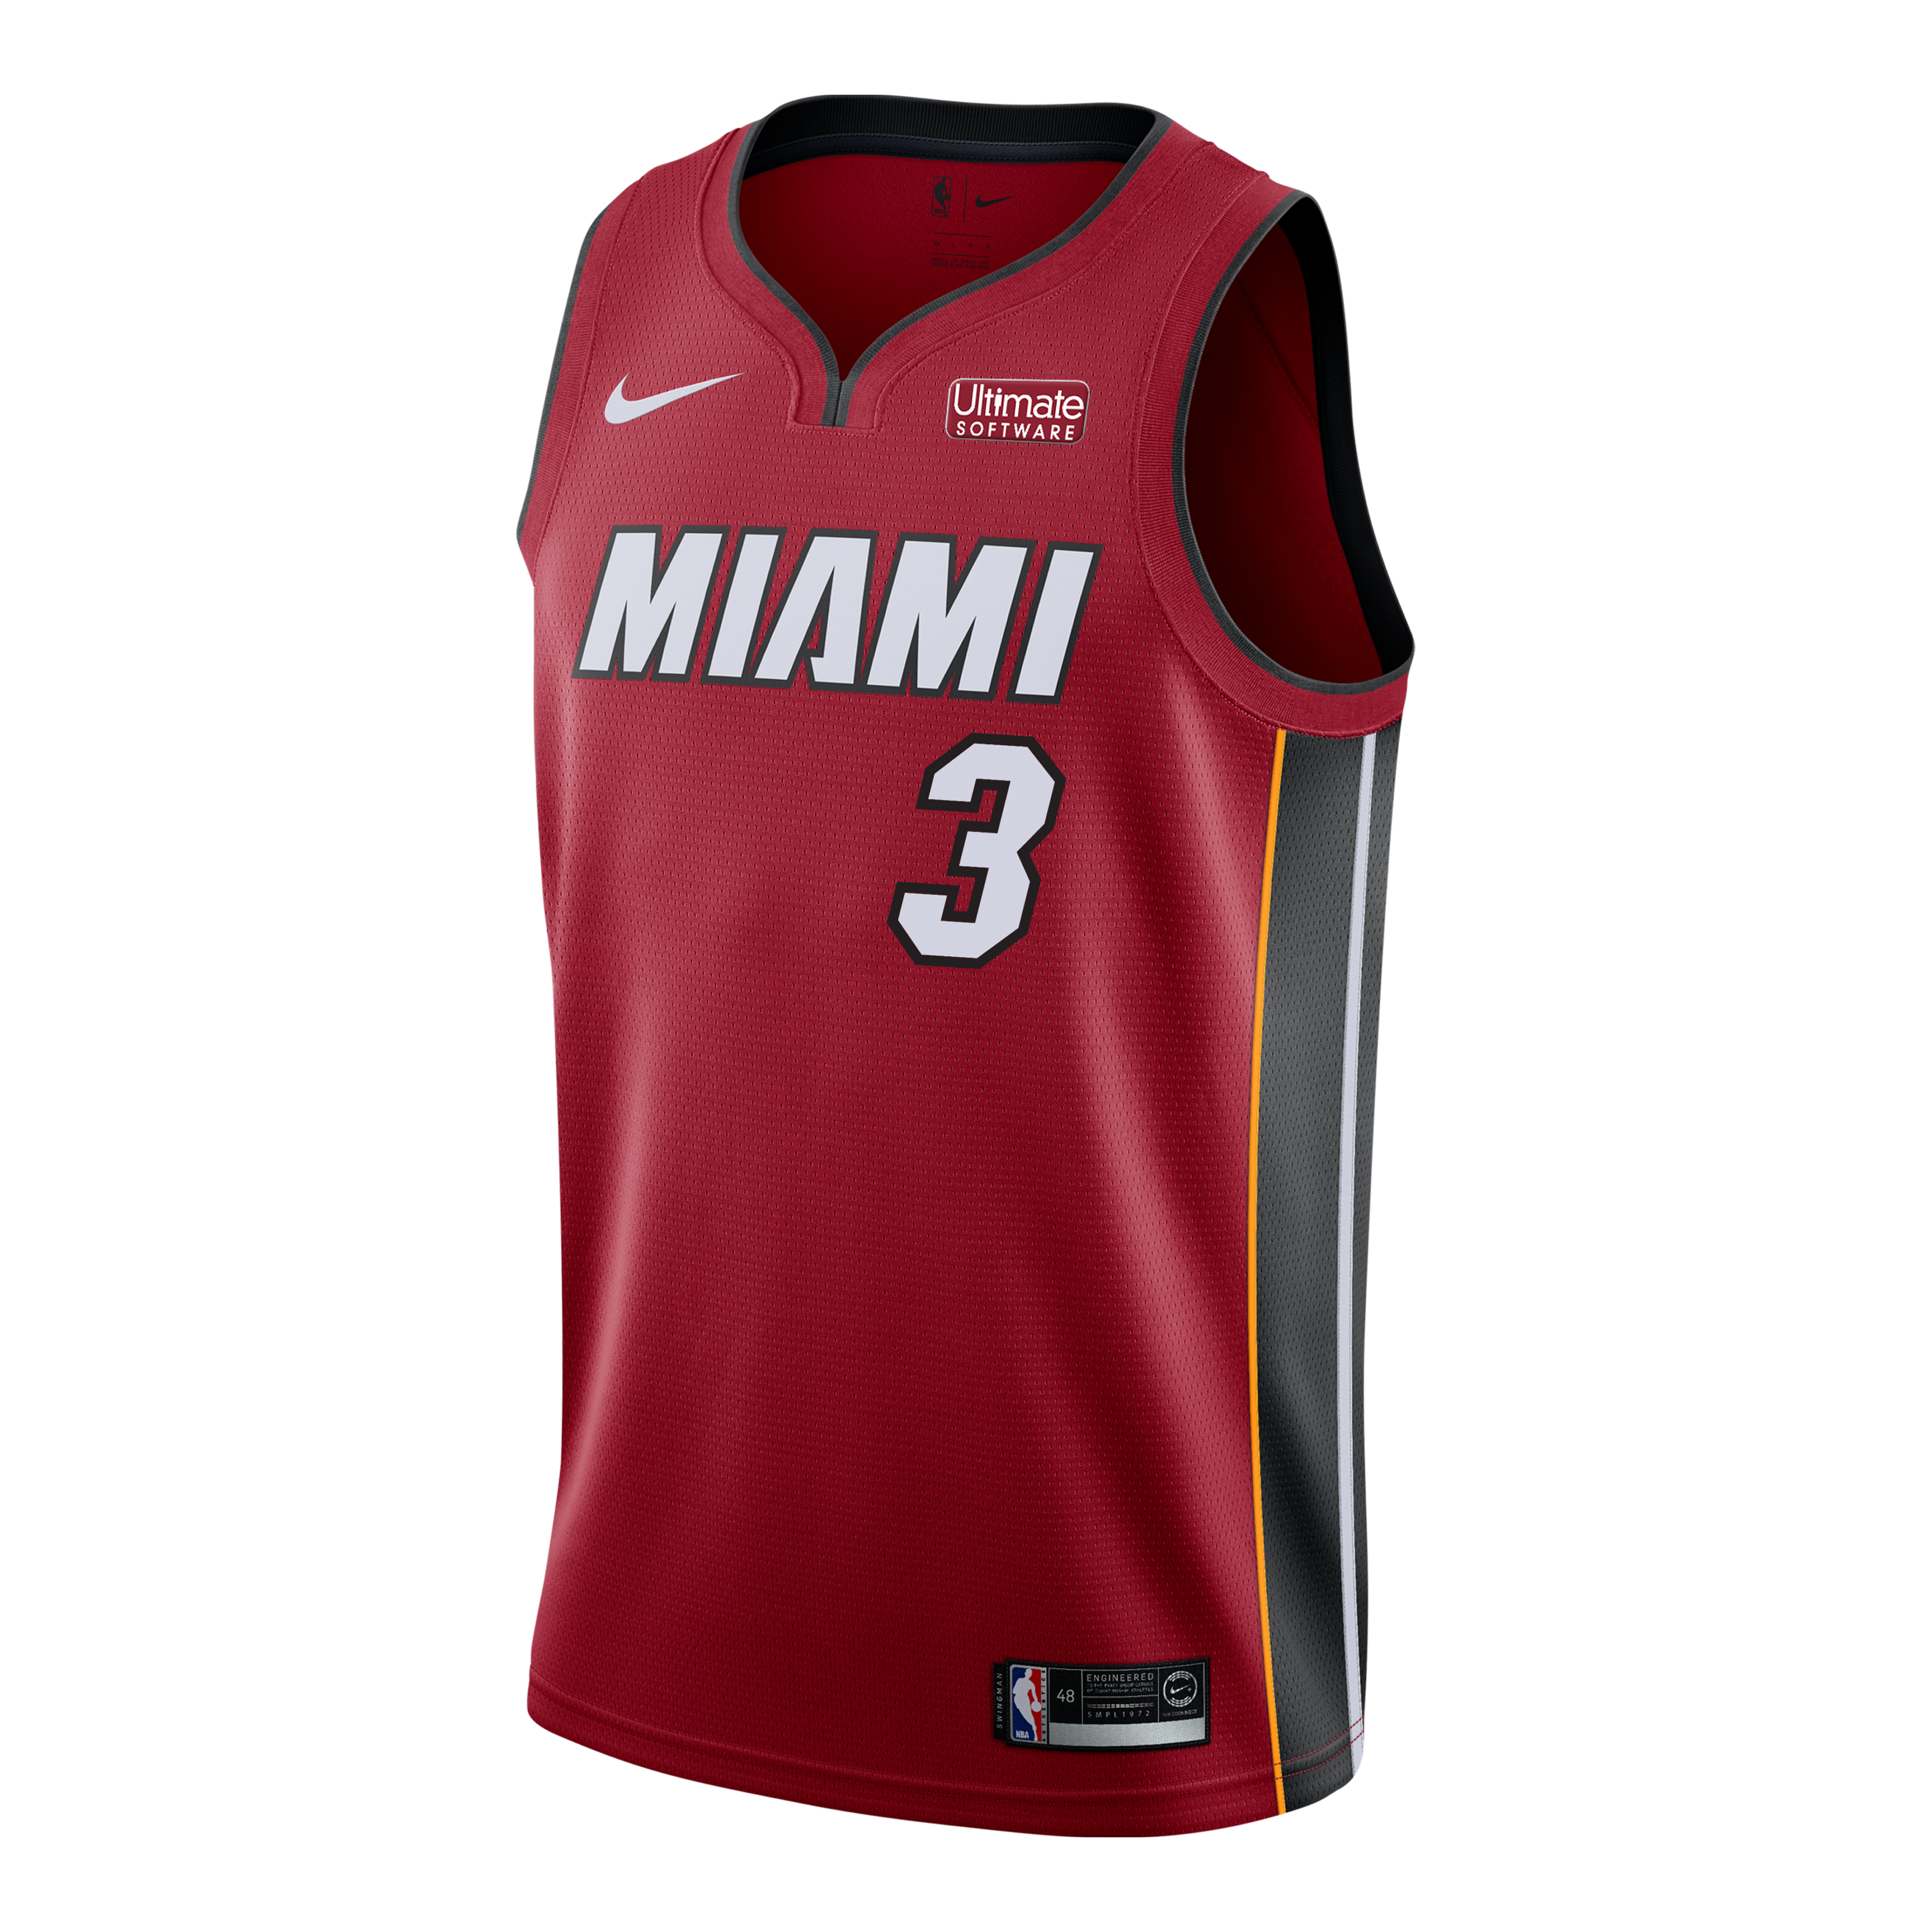 red miami heat jersey